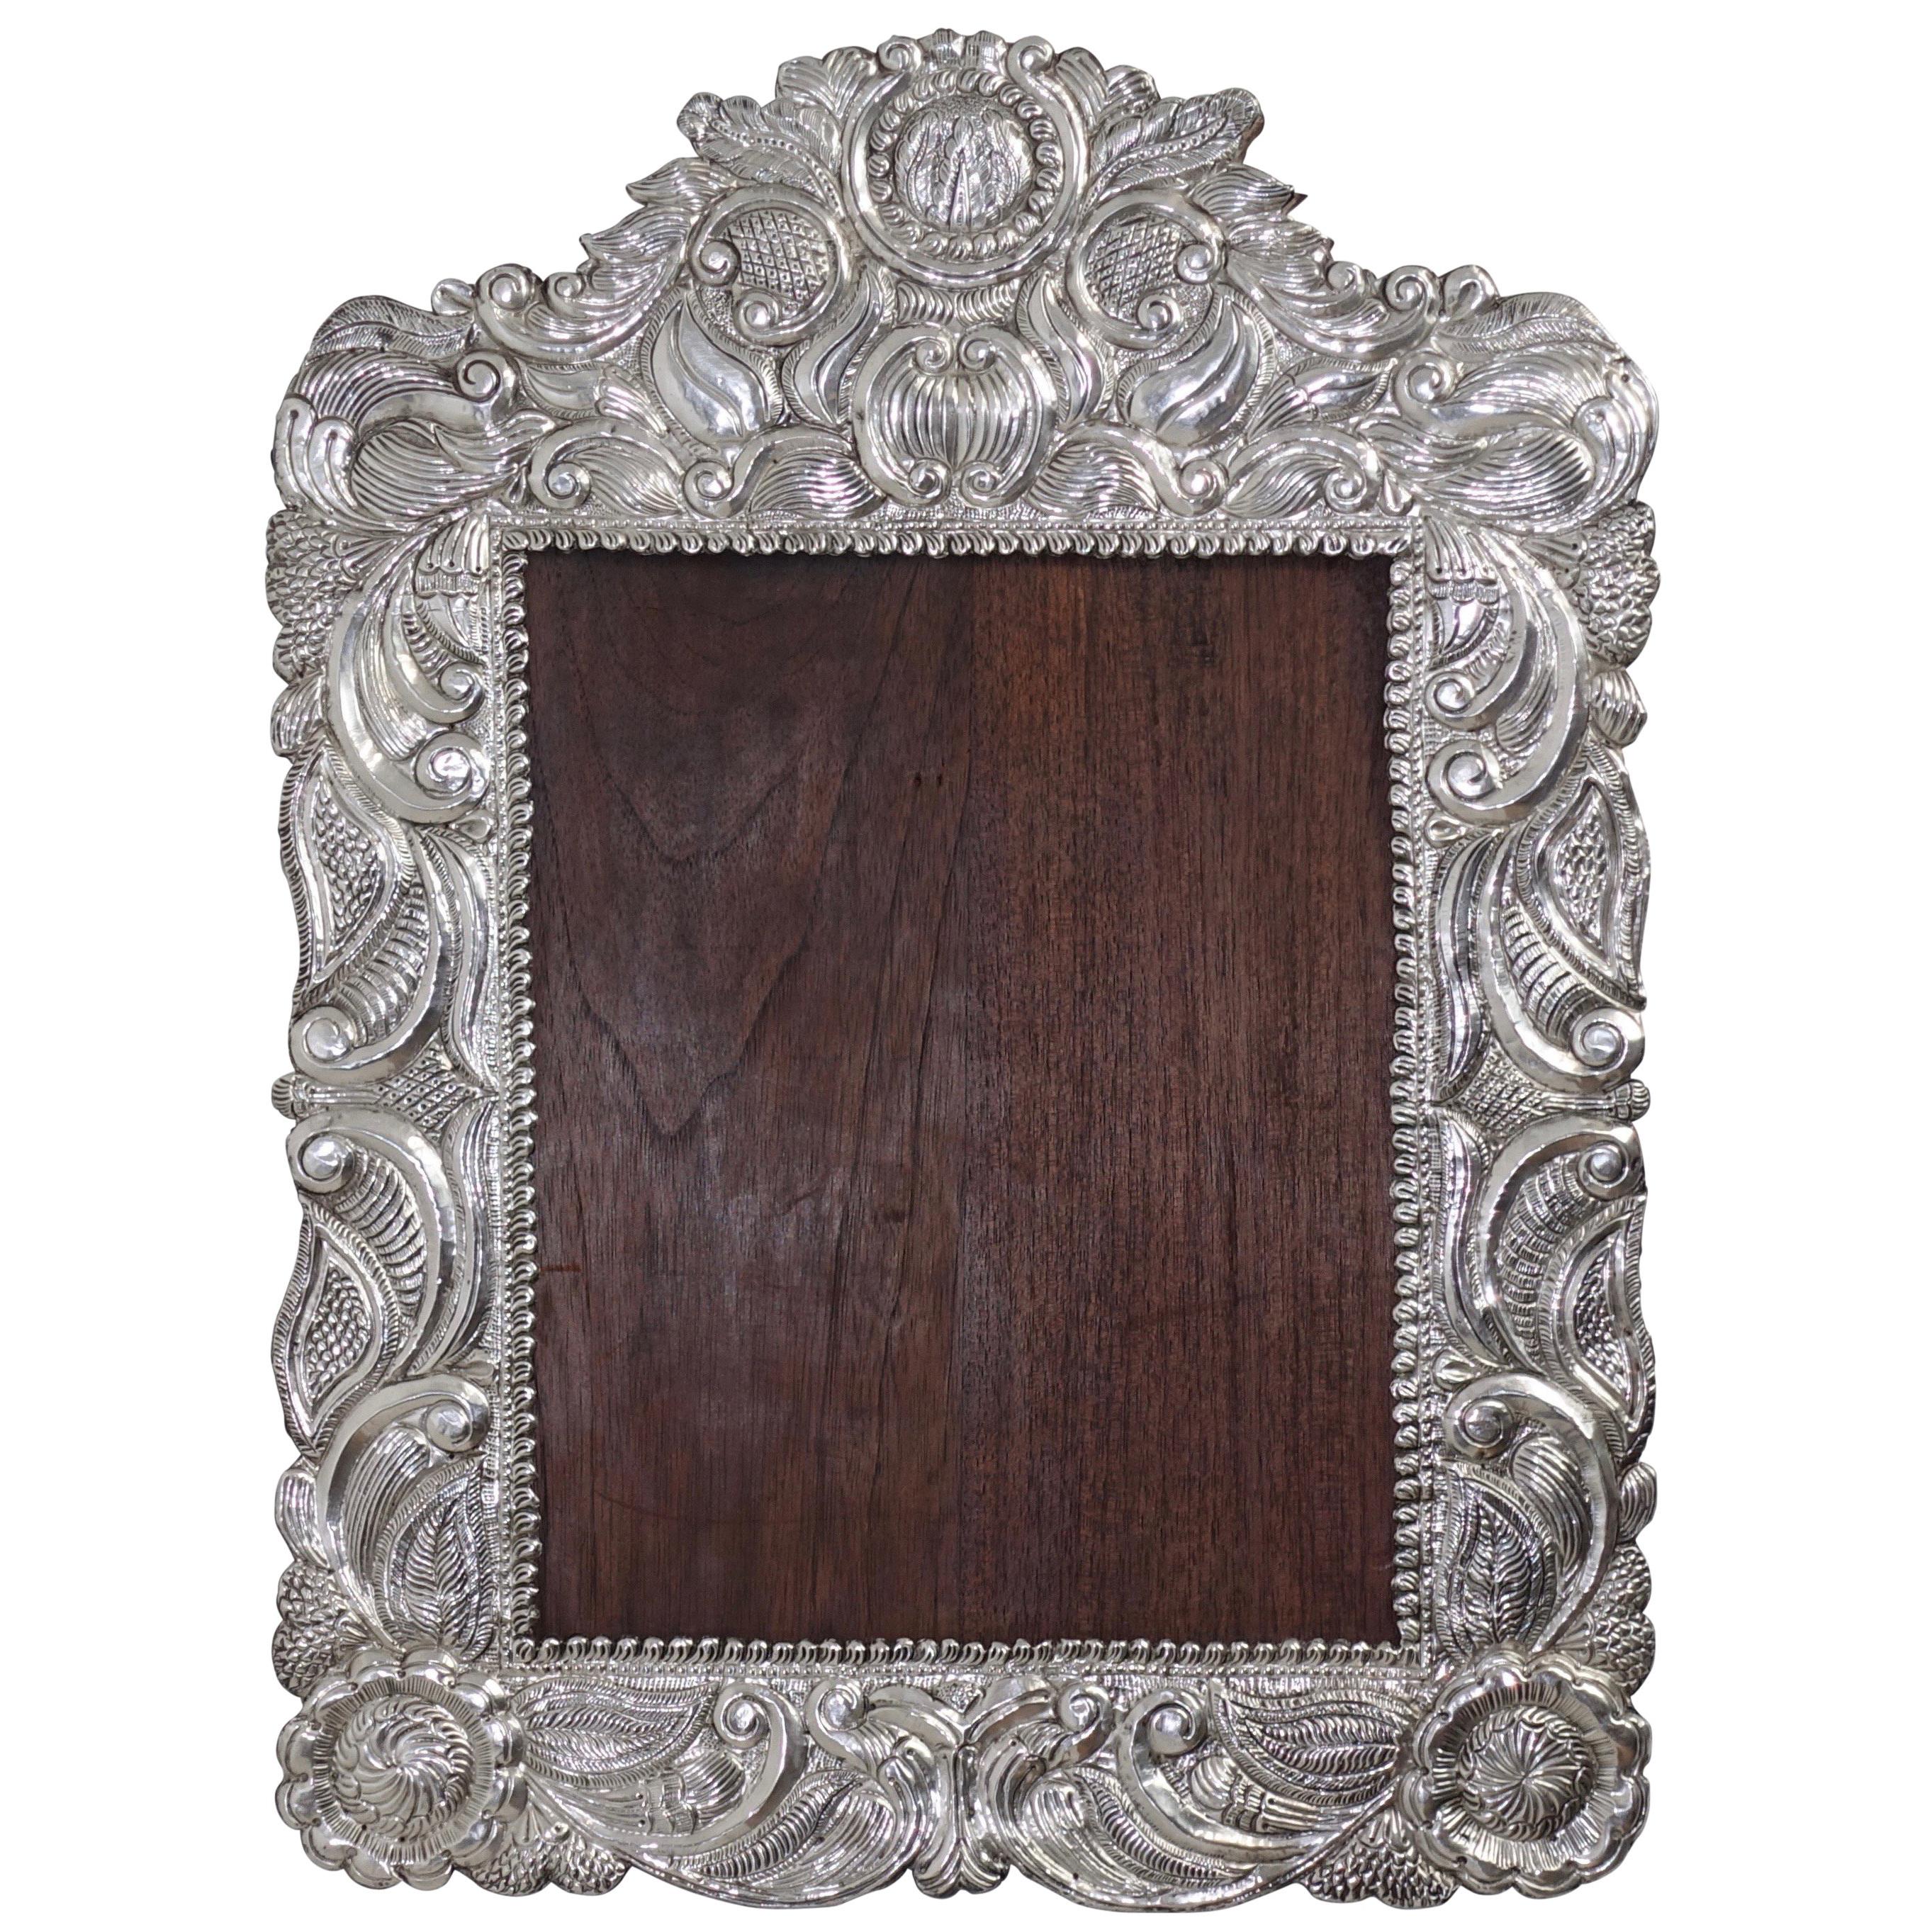 Large South American Repousse Silver Frame, 19th Century